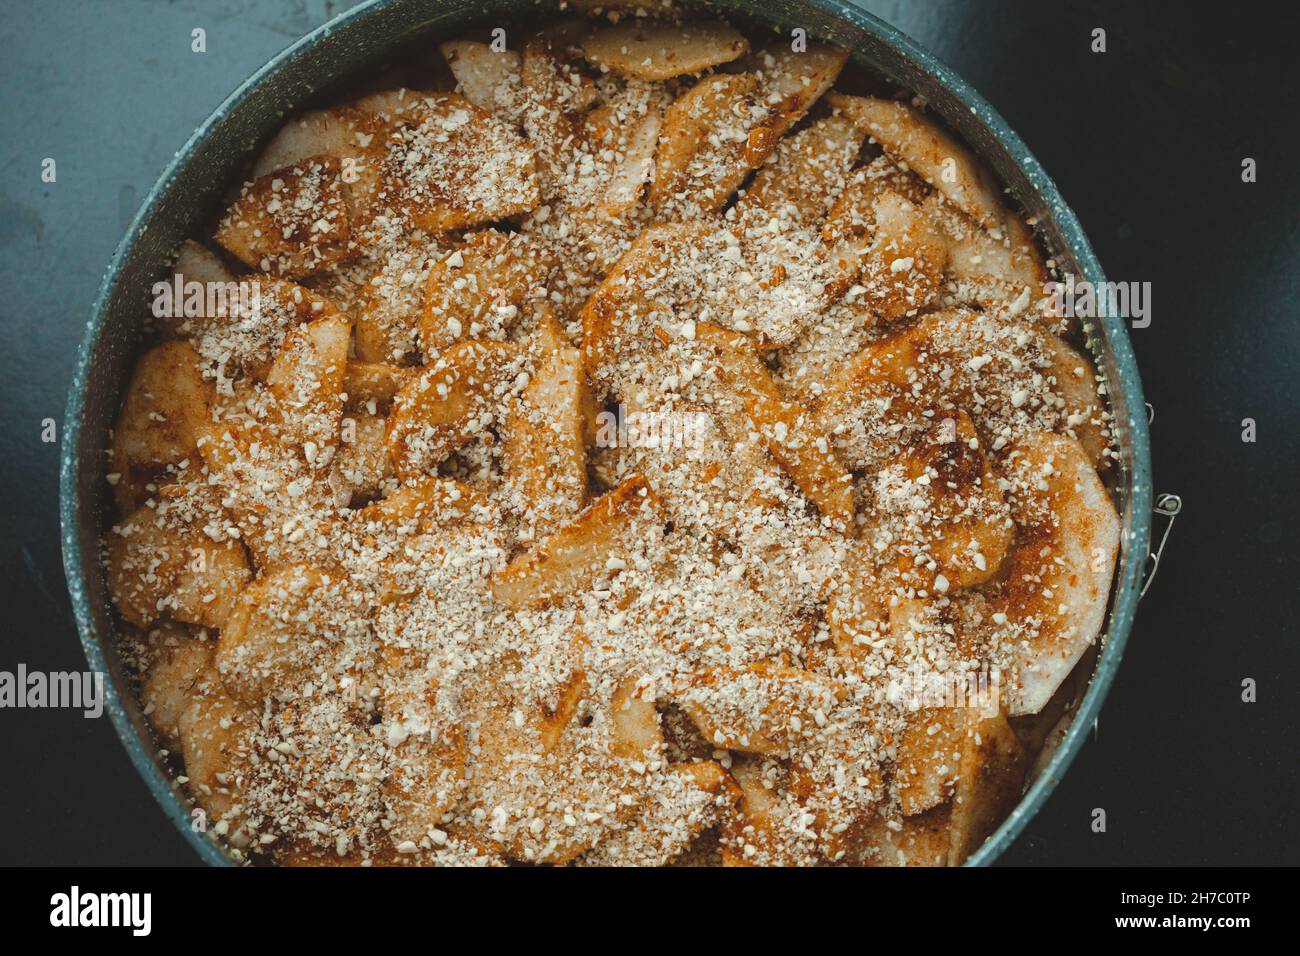 Close-up of raw apple pie in baking dish Stock Photo